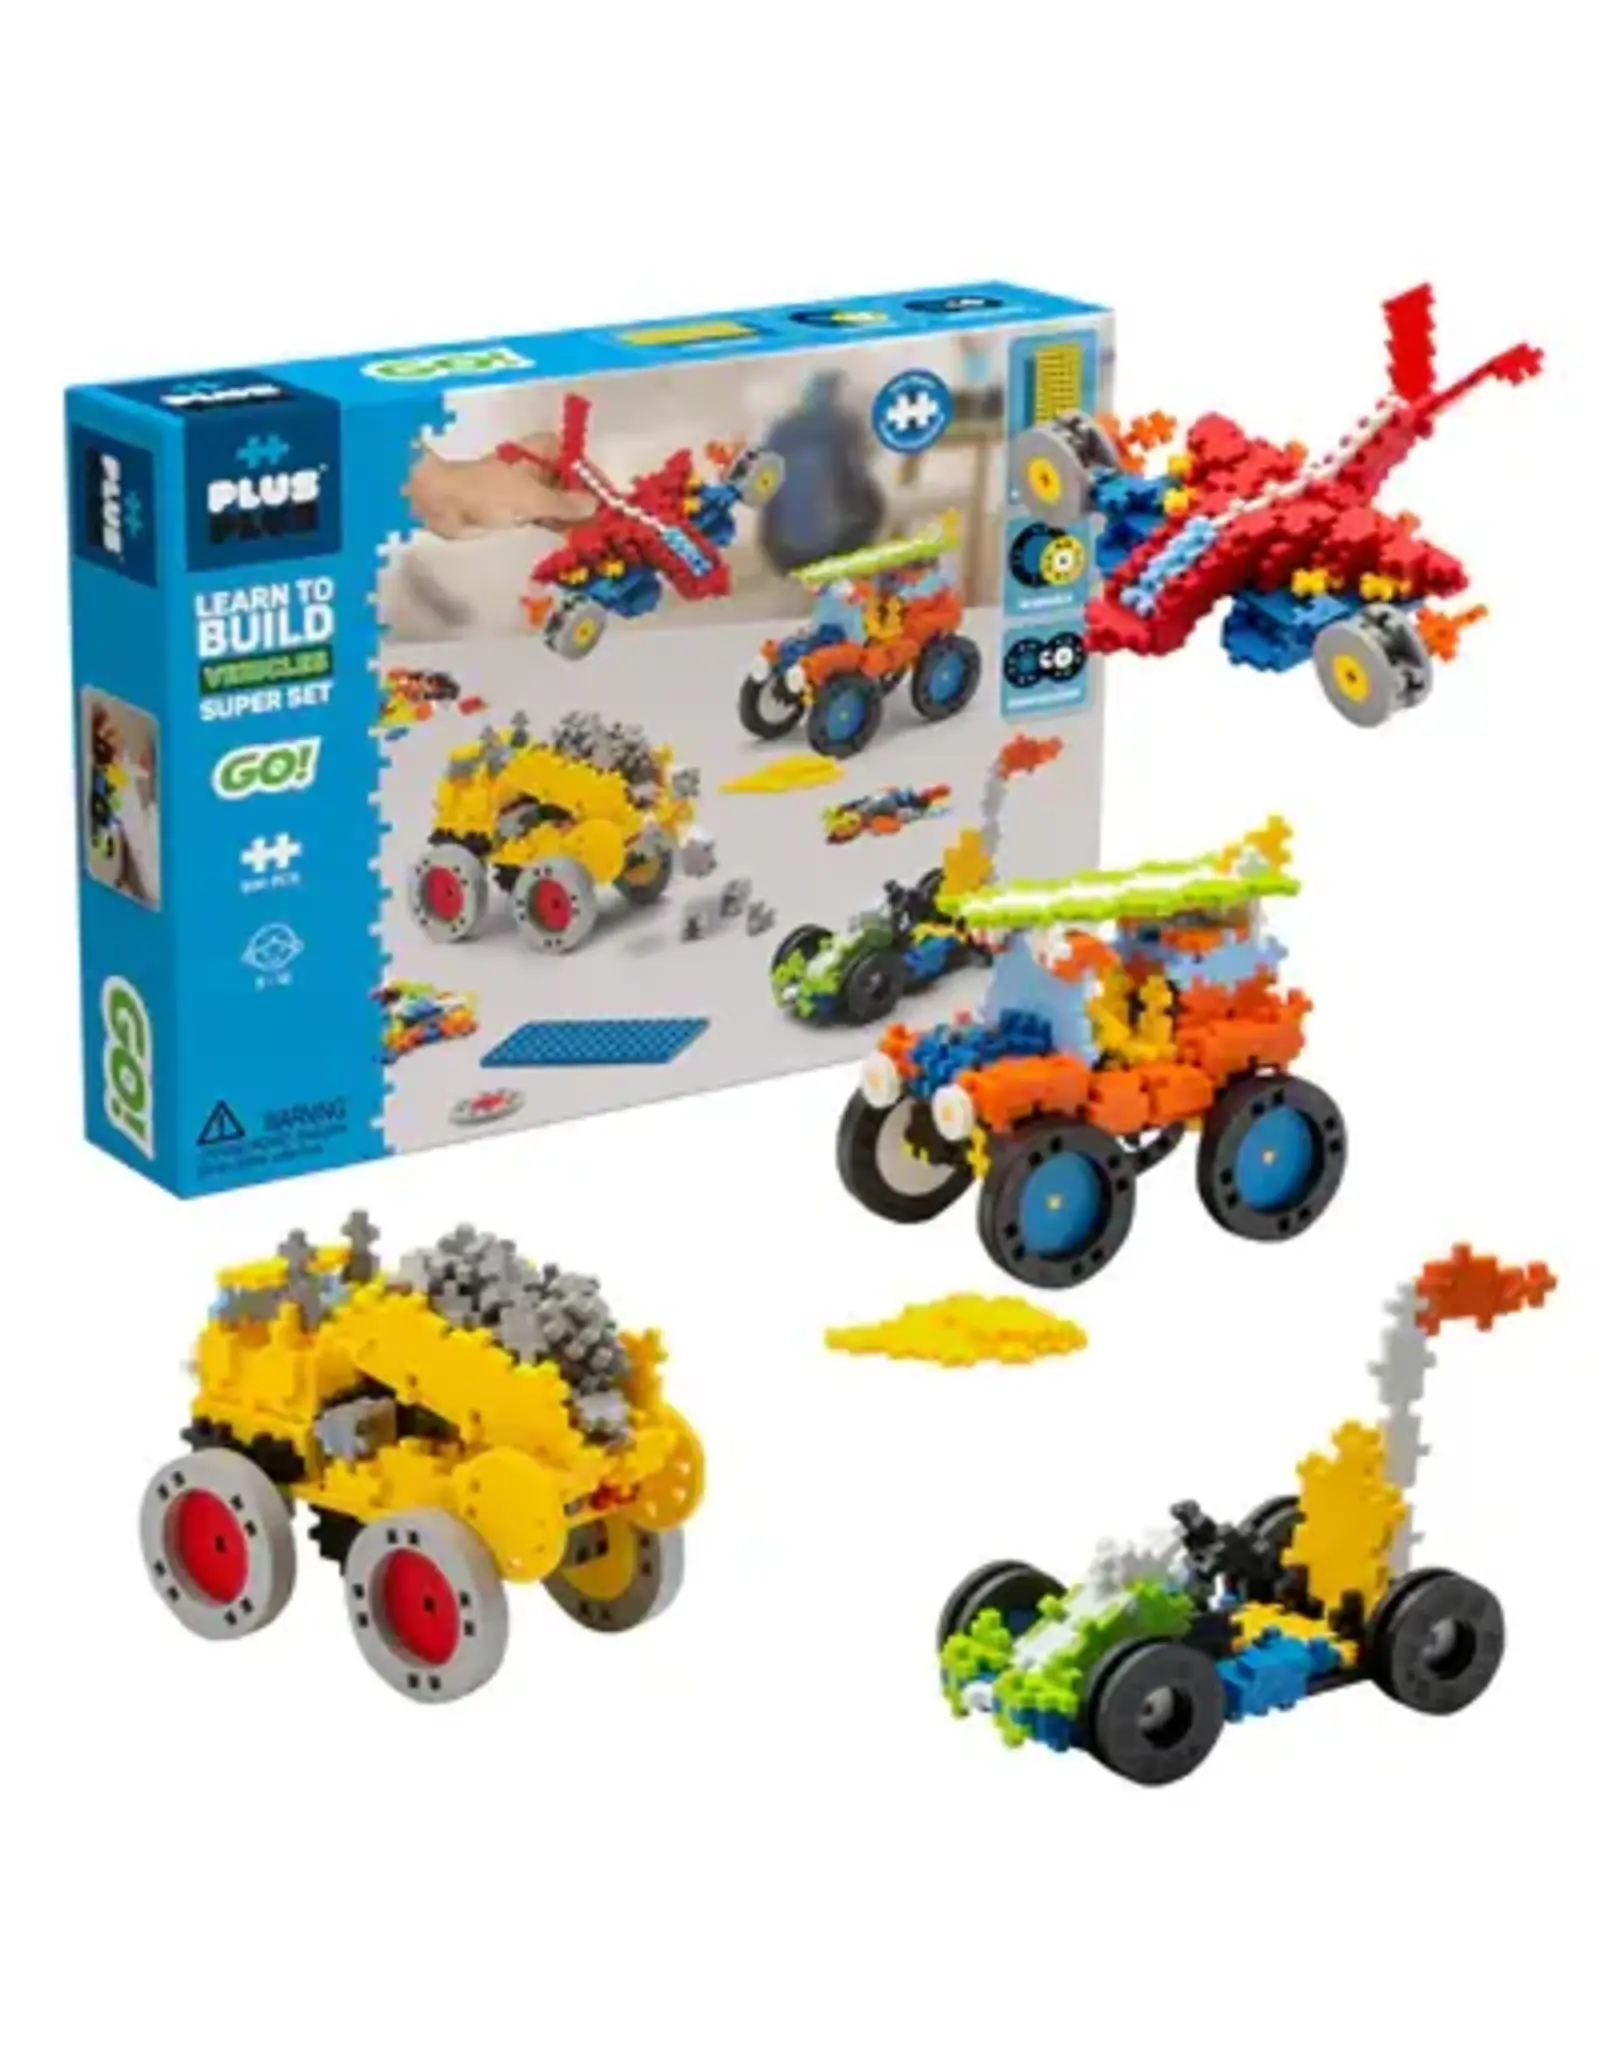 GO! - Learn to Build Vehicles Super Set